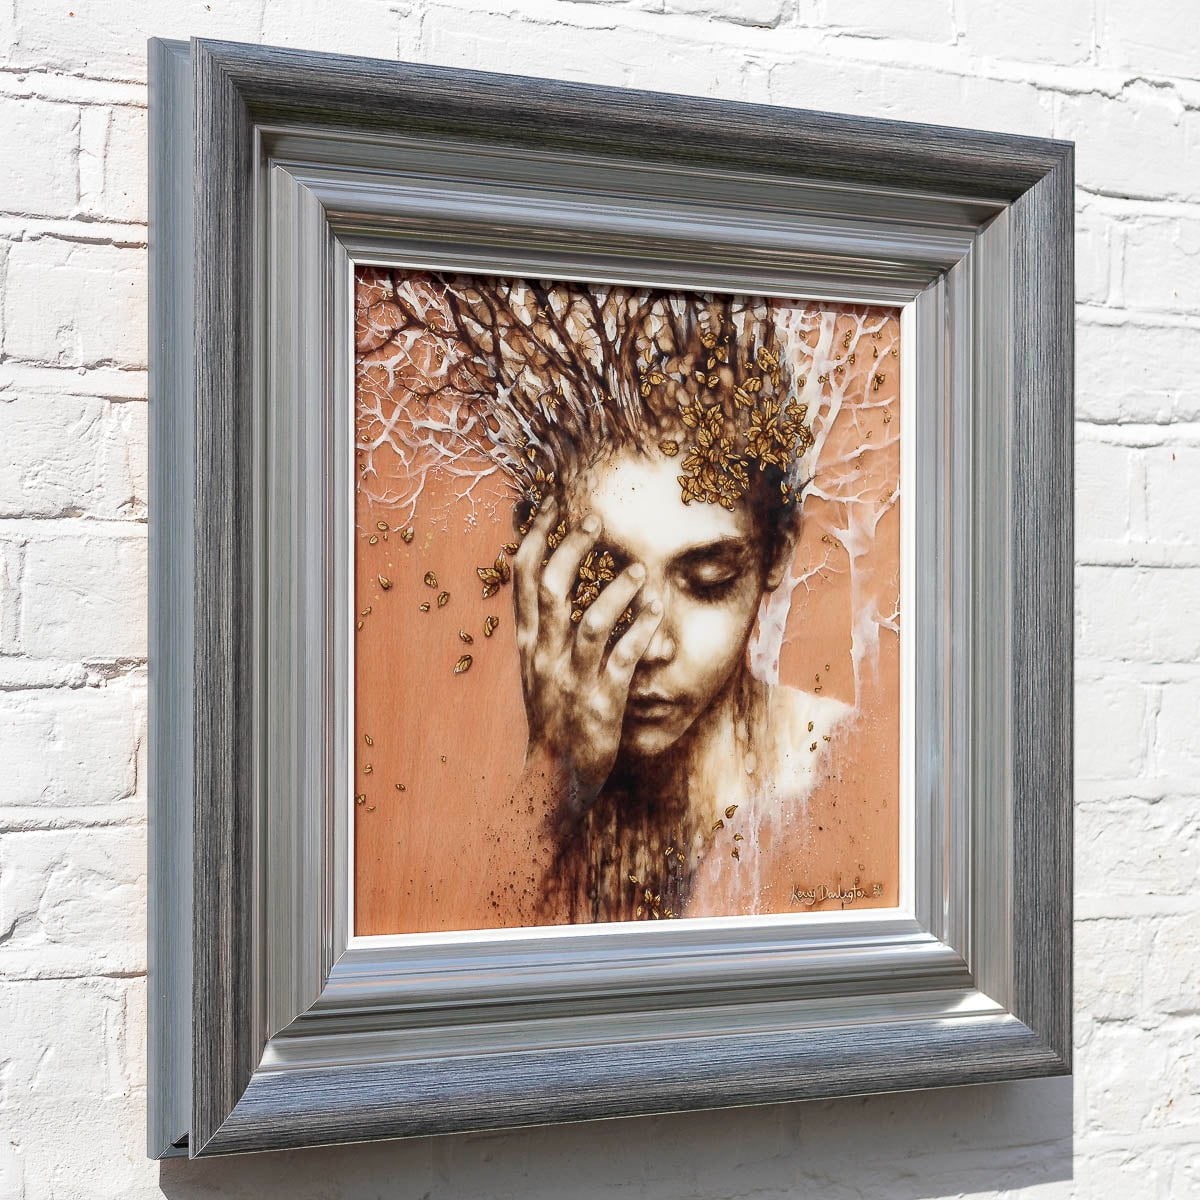 Tangled Roots Kerry Darlington Framed